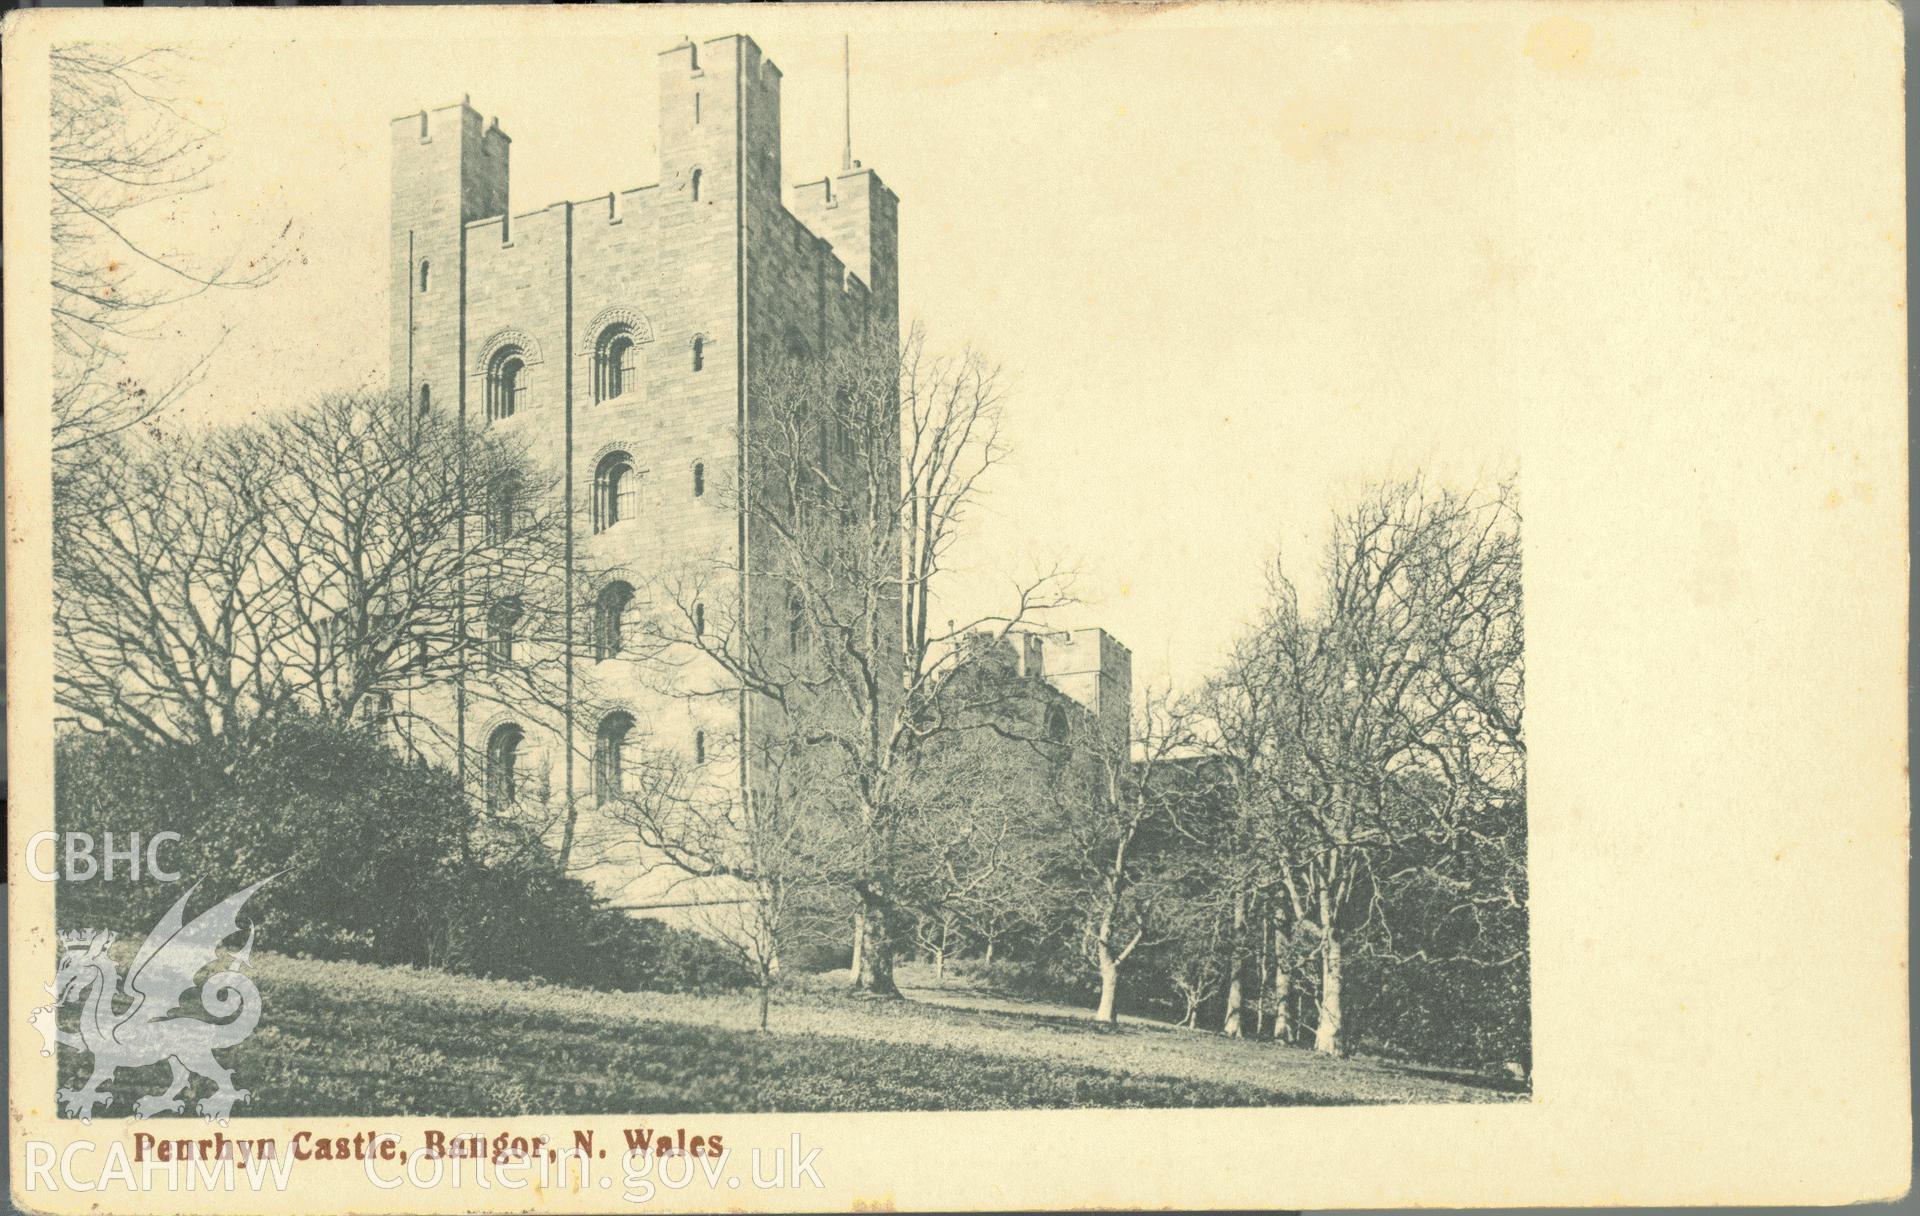 Digitised postcard image of Penrhyn Castle, Bangor, Wickens, Bangor. Produced by Parks and Gardens Data Services, from an original item in the Peter Davis Collection at Parks and Gardens UK. We hold only web-resolution images of this collection, suitable for viewing on screen and for research purposes only. We do not hold the original images, or publication quality scans.